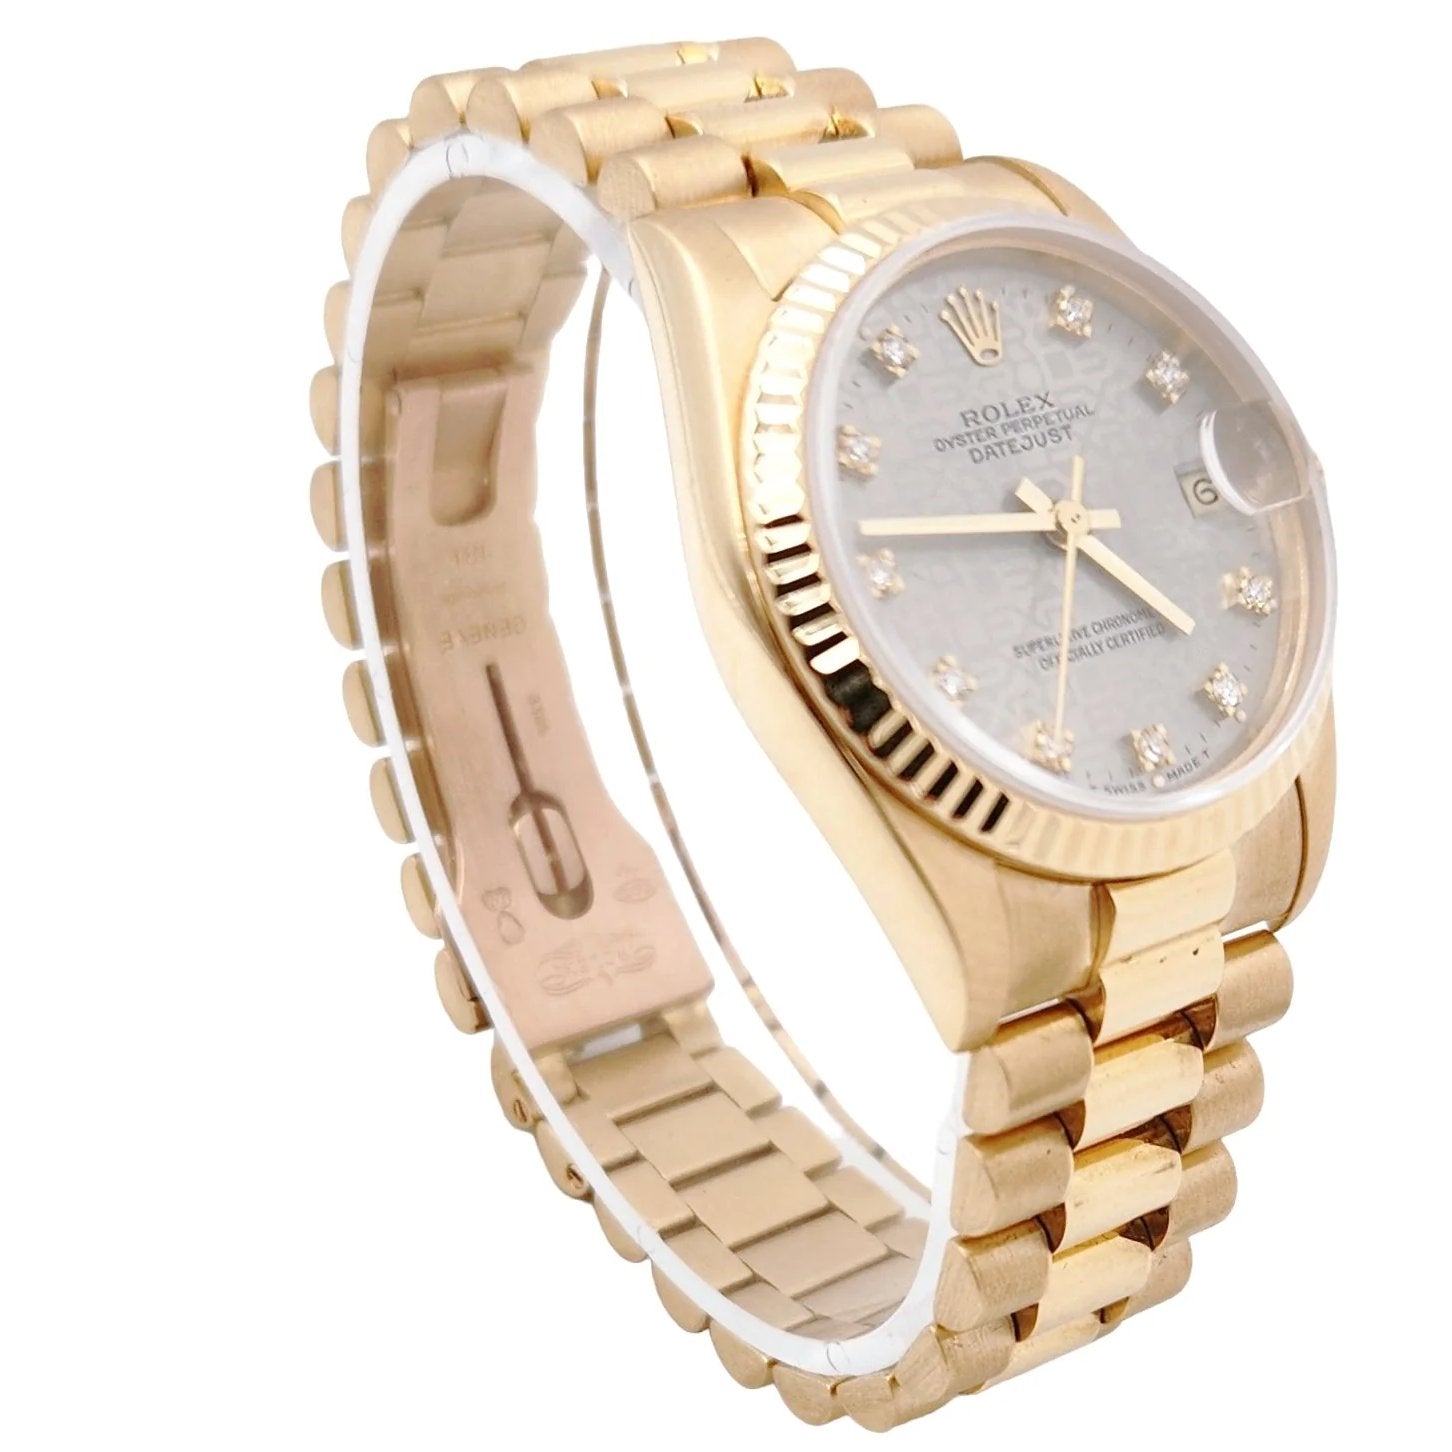 Ladies Rolex 31mm Midsize Presidential 18K Solid Yellow Gold Watch with Silver Diamond Dial and Fluted Bezel. (Pre-Owned)